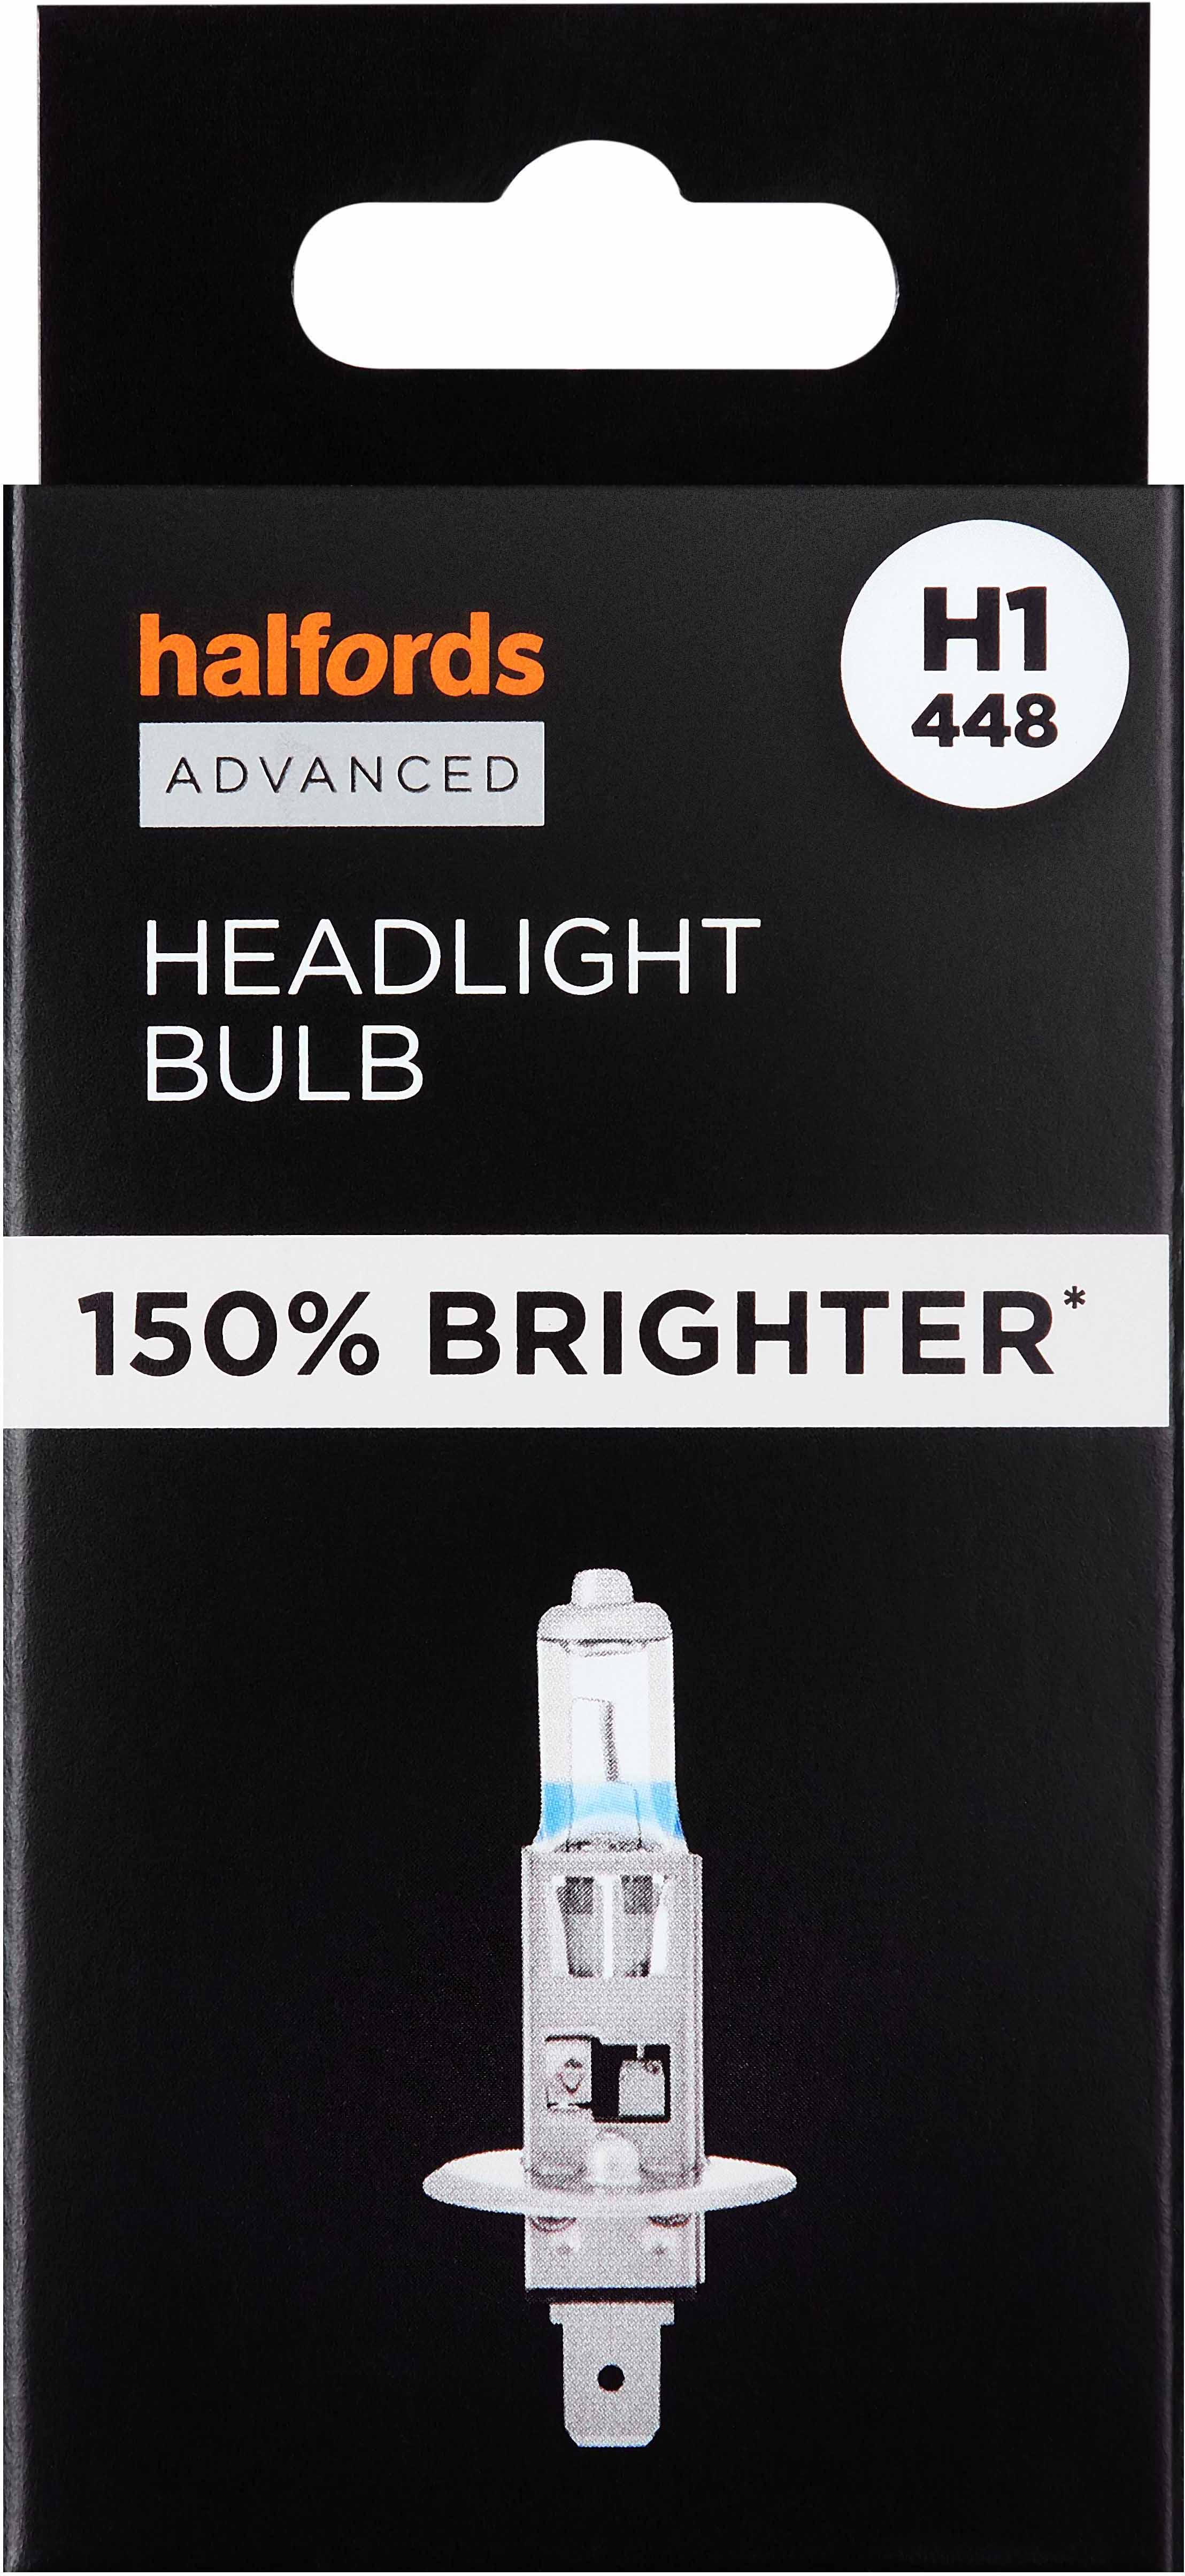 H1 448 Car Headlight Bulb Halfords Advanced Up To +150 Percent Single Pack